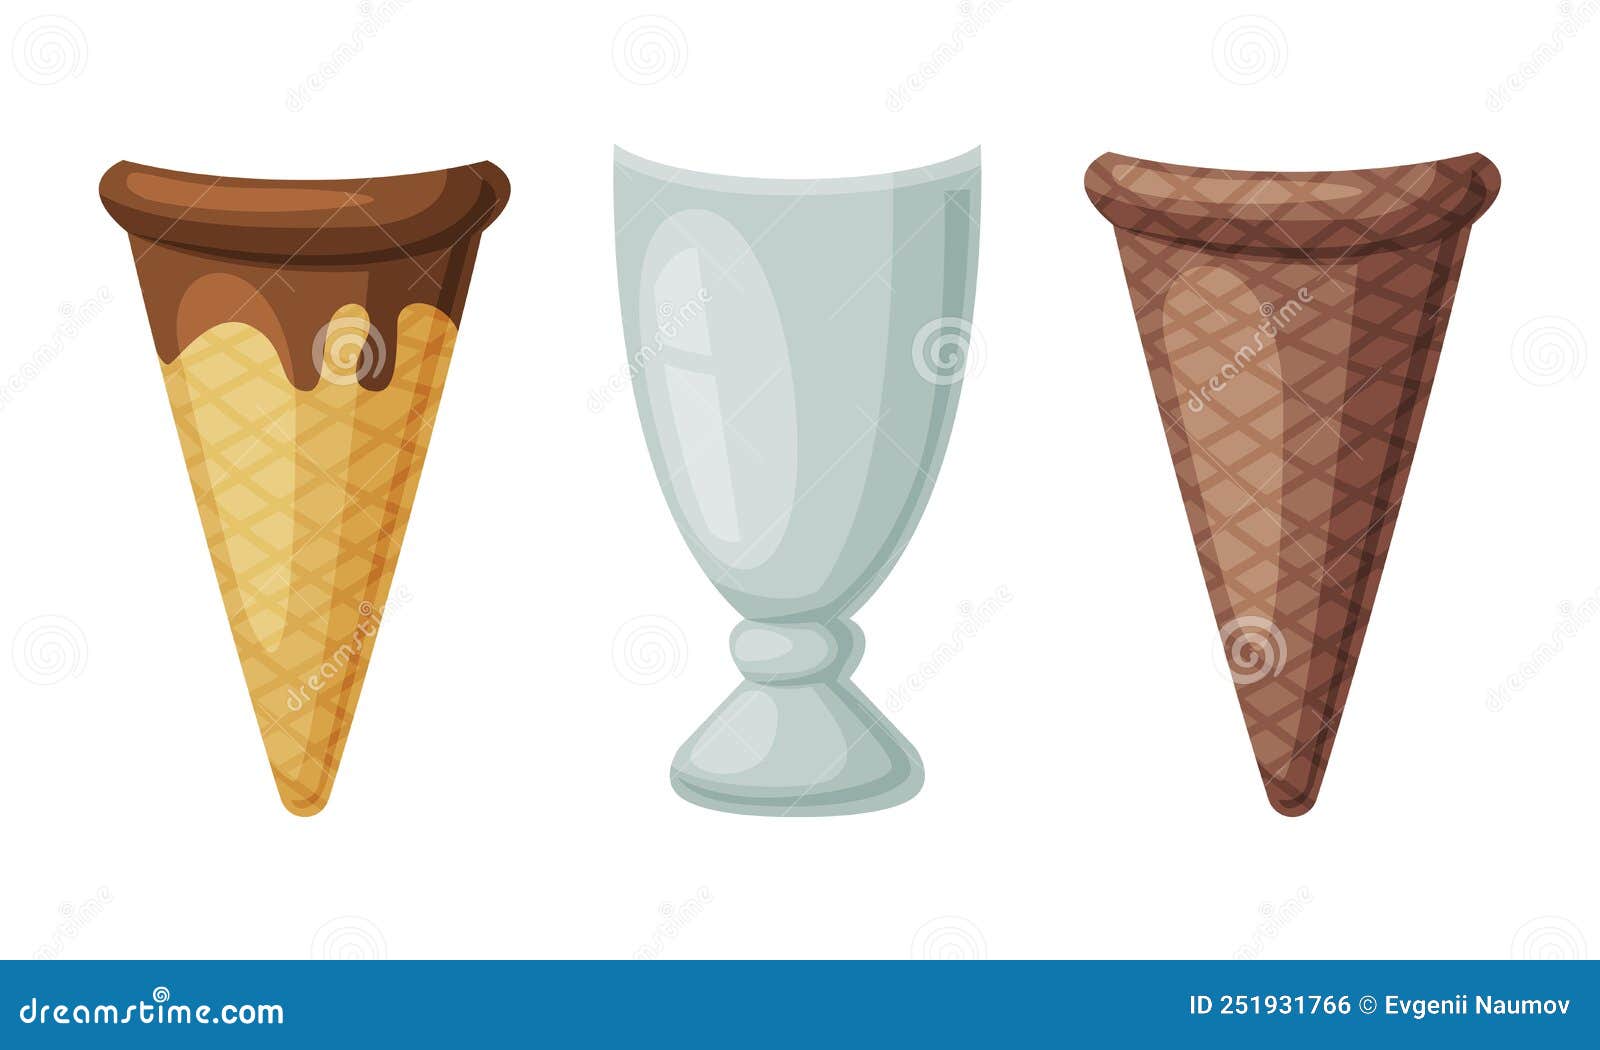 https://thumbs.dreamstime.com/z/empty-glass-ice-cream-cup-waffle-cone-as-container-dessert-vector-set-sweet-frozen-snack-preparation-concept-empty-glass-251931766.jpg